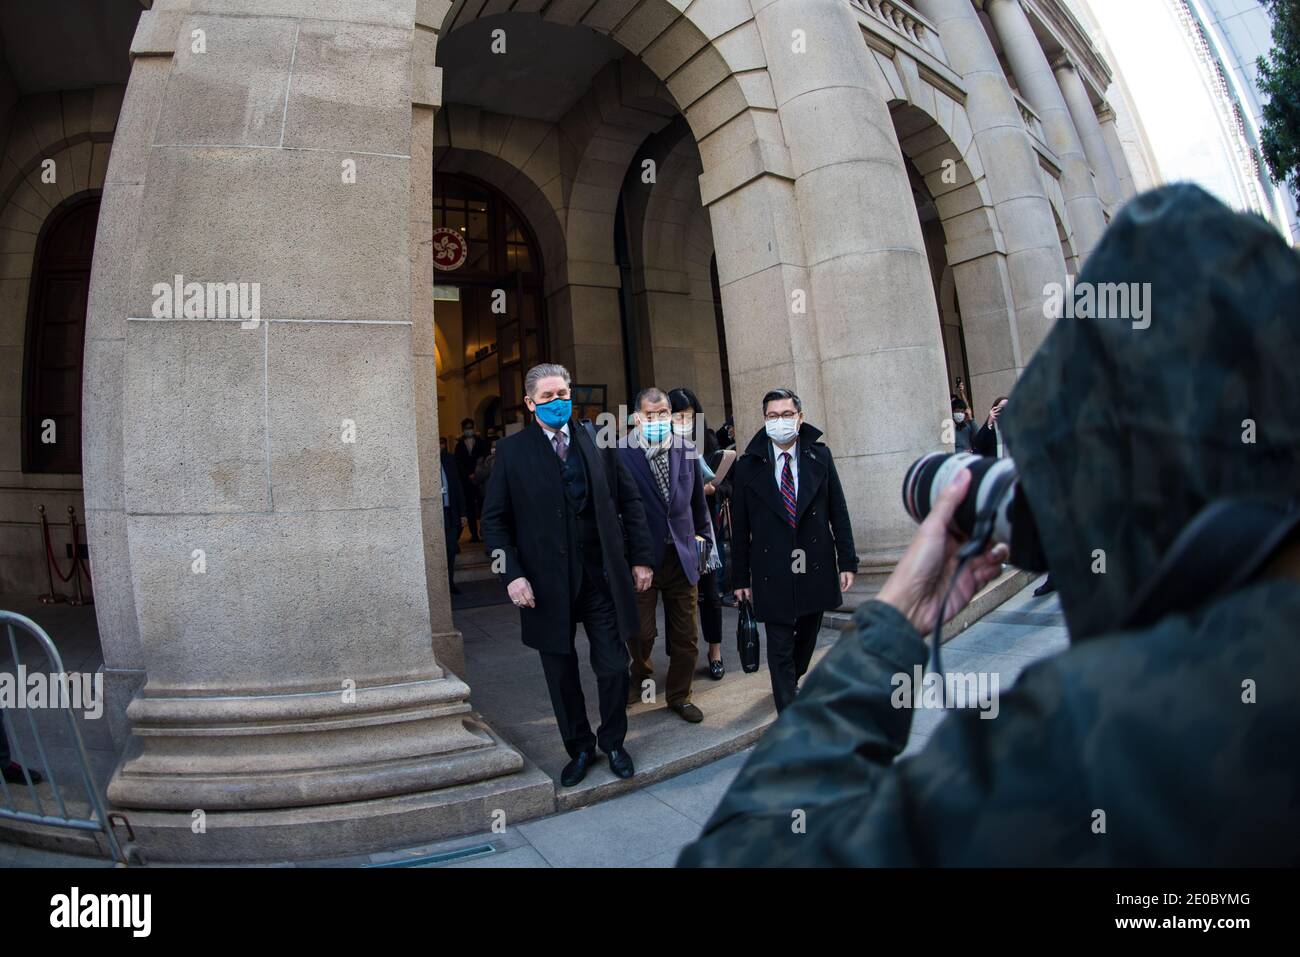 Hong Kong, China. 31st Dec, 2020. Media Tycoon JImmy Lai exits the Court of Final Appeal accompanied by his lawyers after an urgent hearing requested by the Department of Justice on his bail for National Security Law alleged breaches. Credit: Marc R. Fernandes/Alamy Live News. Stock Photo